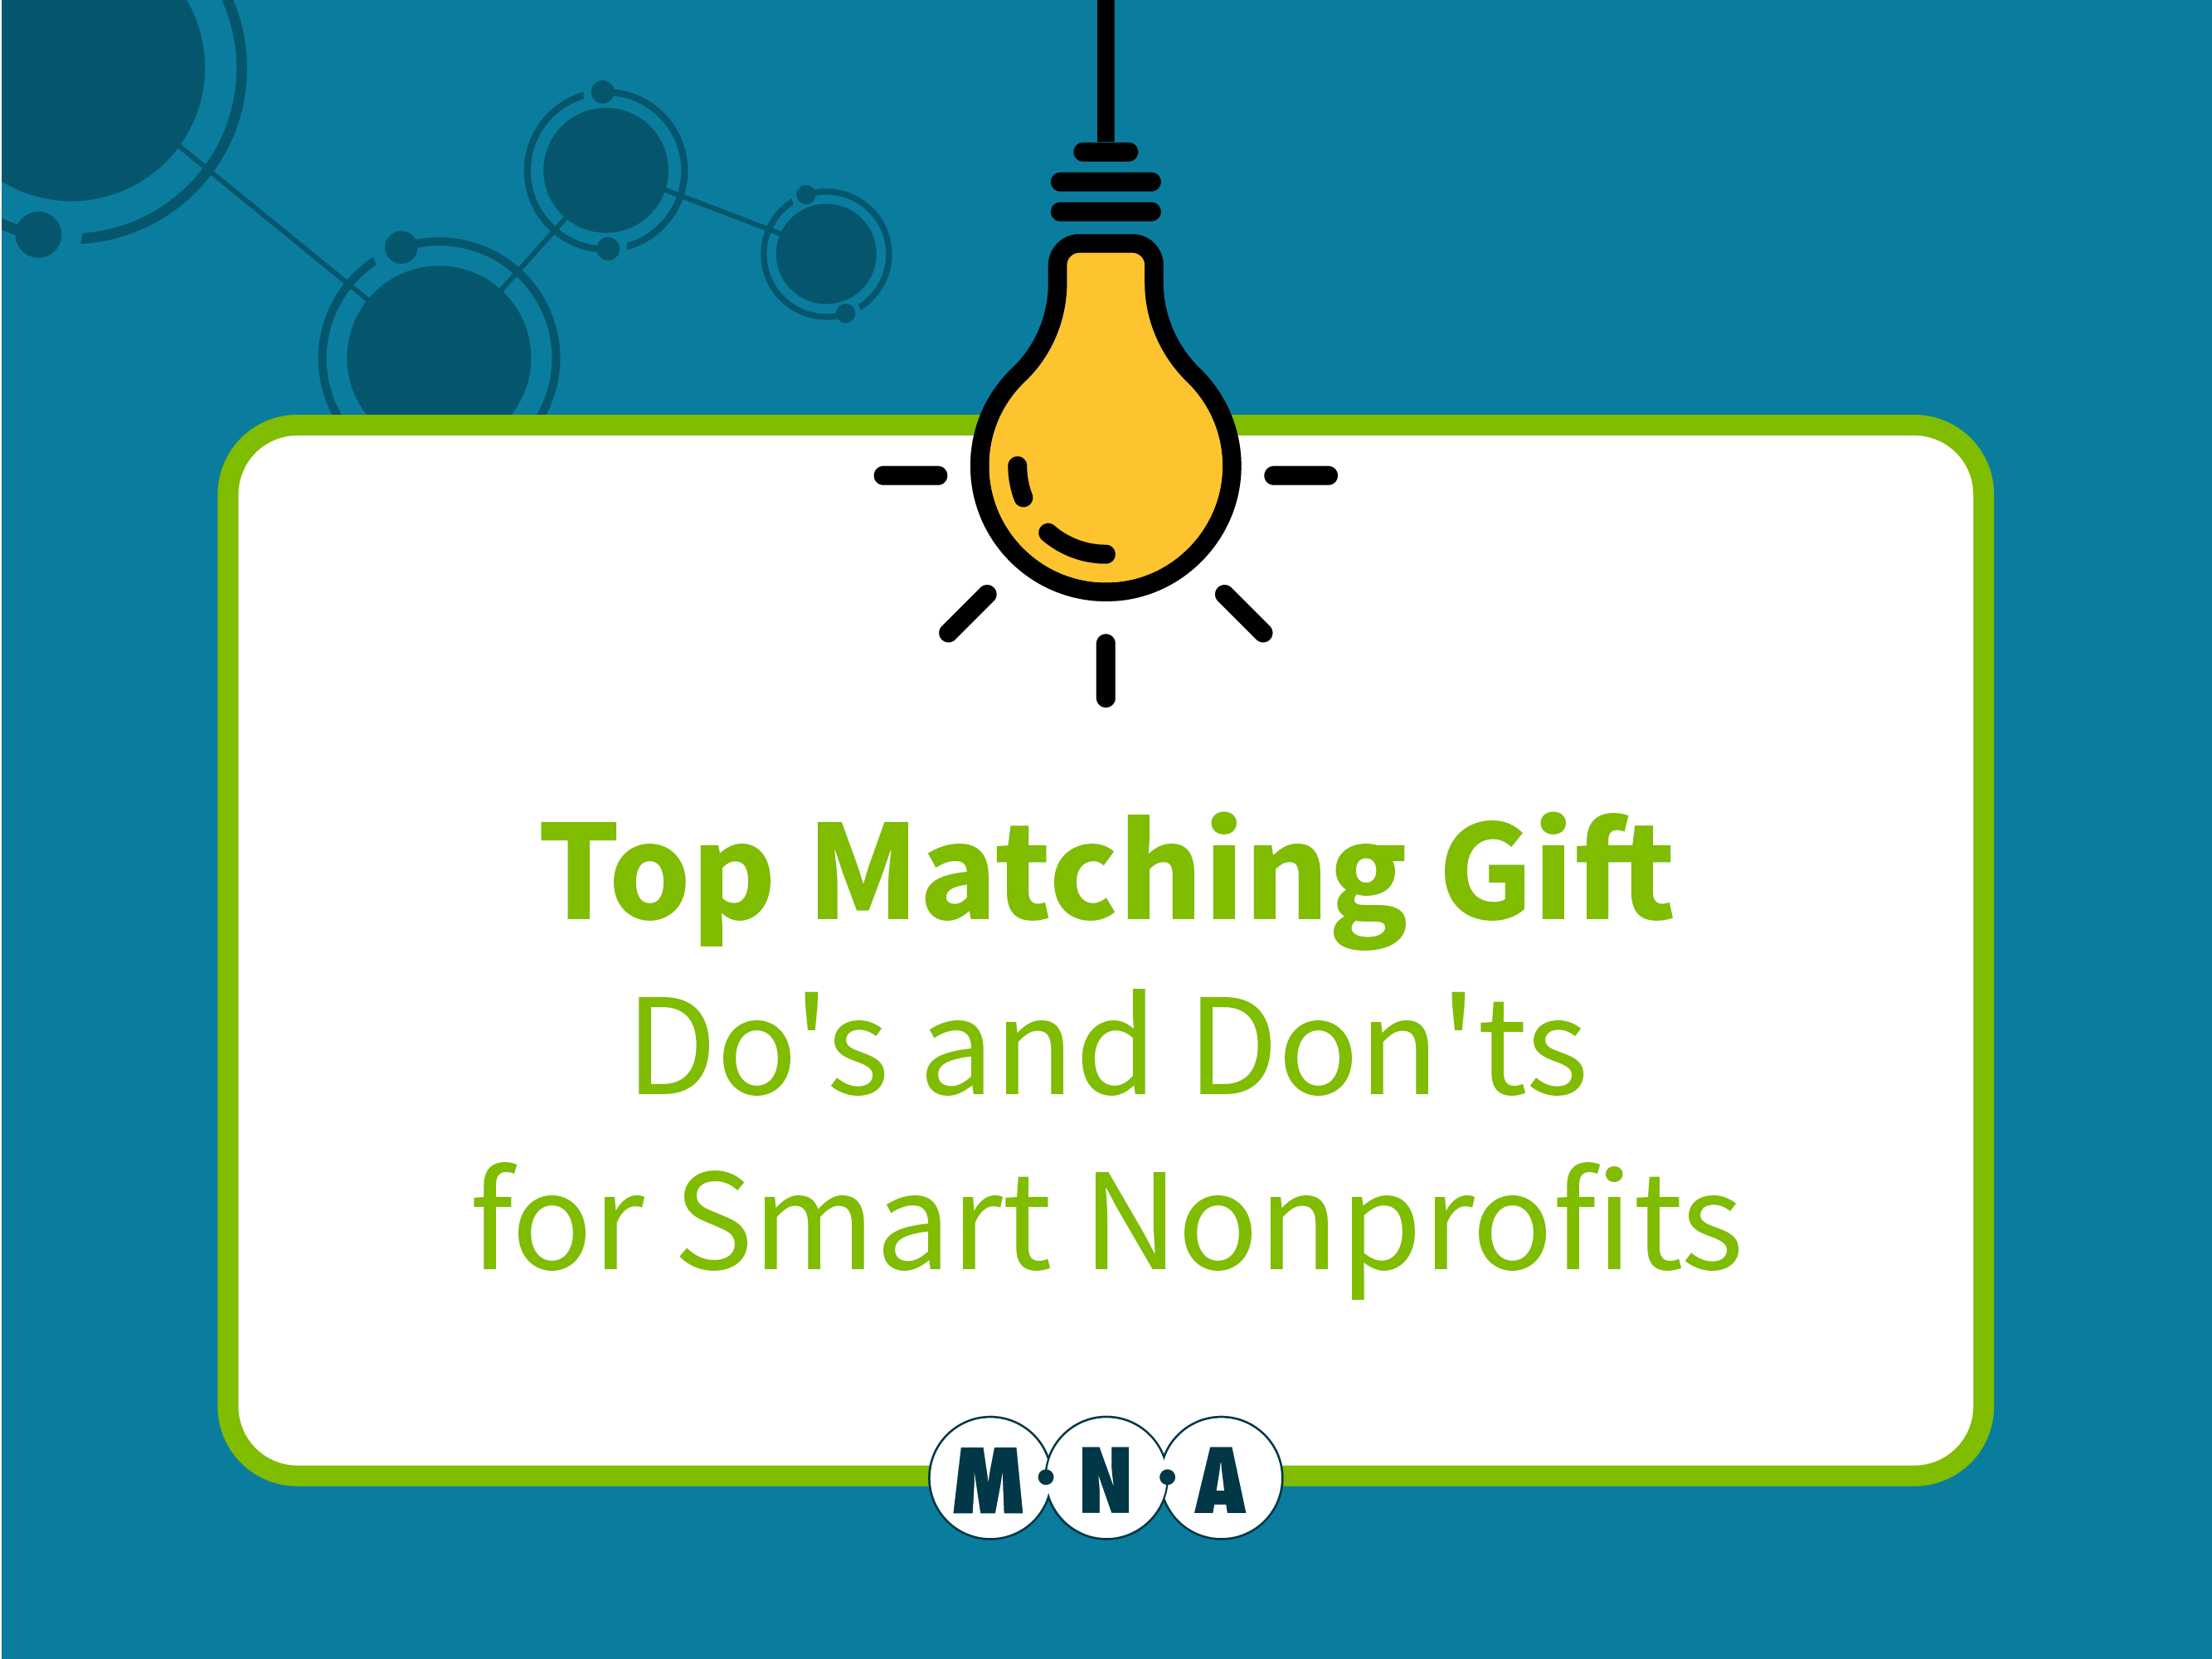 Top Matching Gifts Do's and Don'ts for Smart Nonprofits - Montana